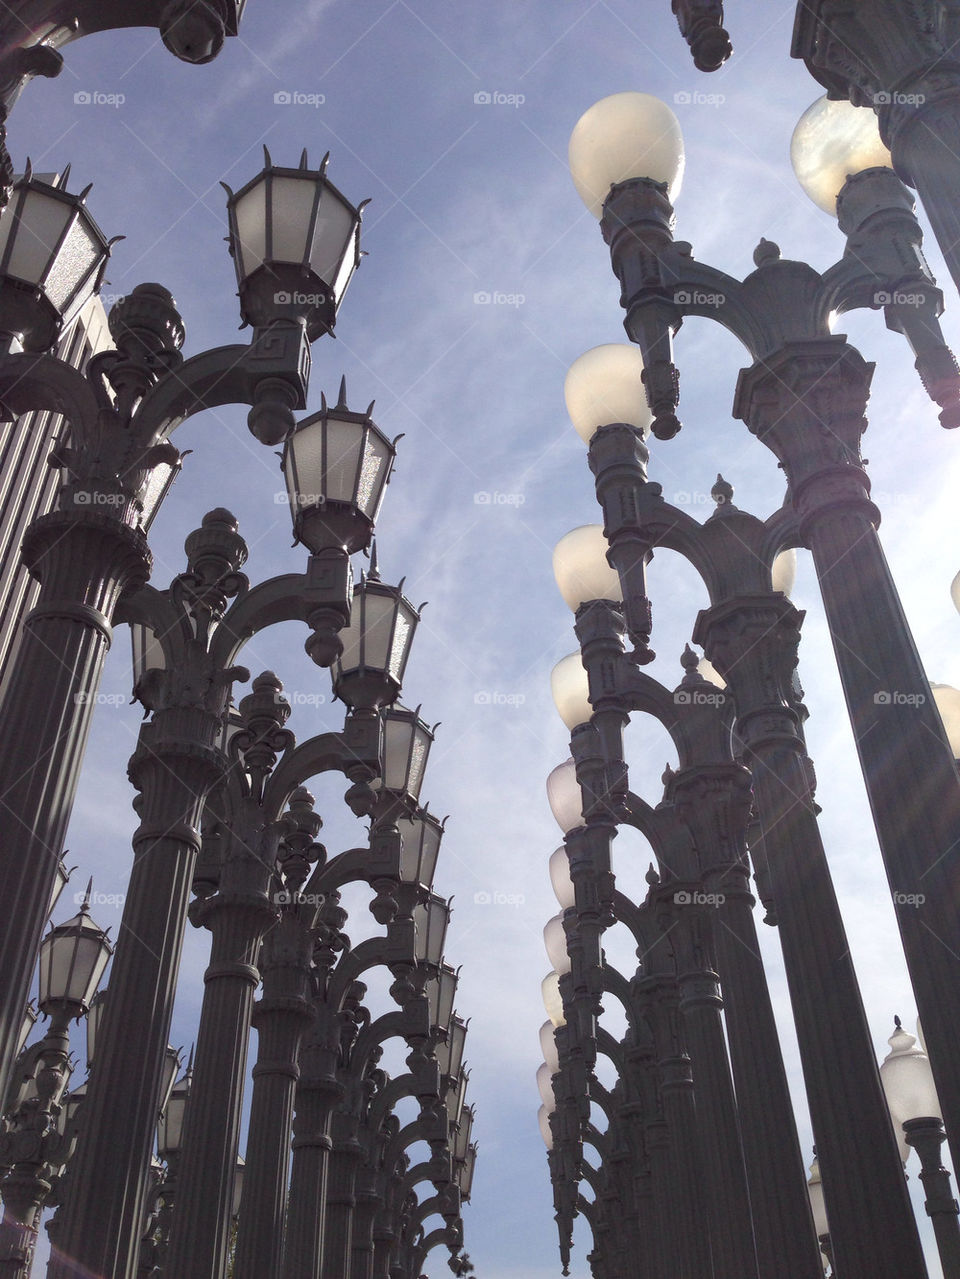 Some lights outside of a museum near Hollywood.